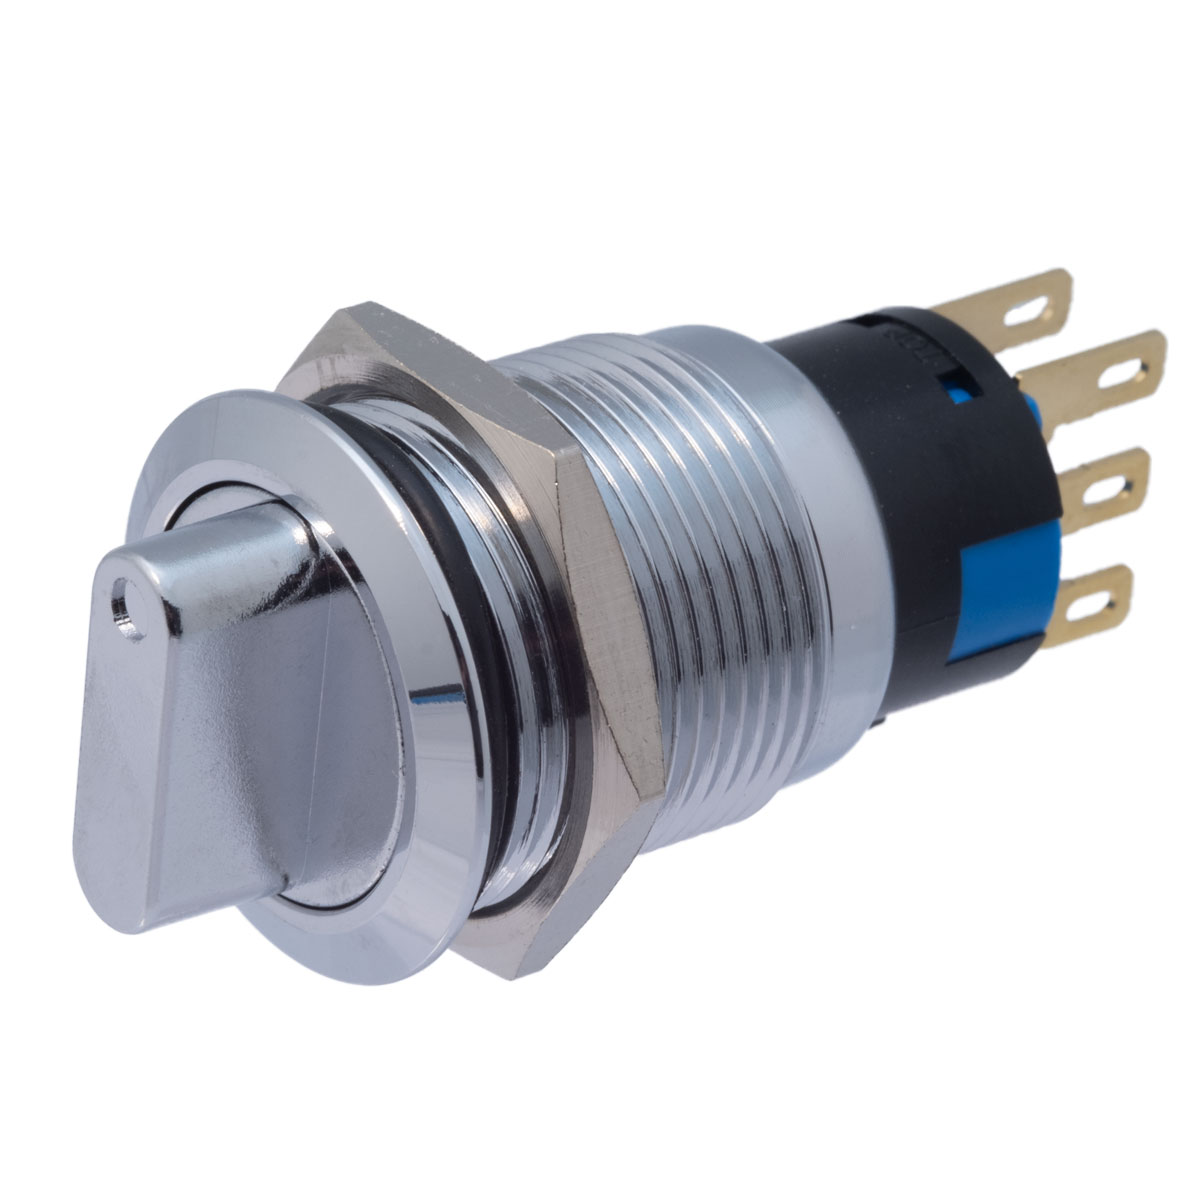 Rotary switch 3 positions round metal waterproof IP65